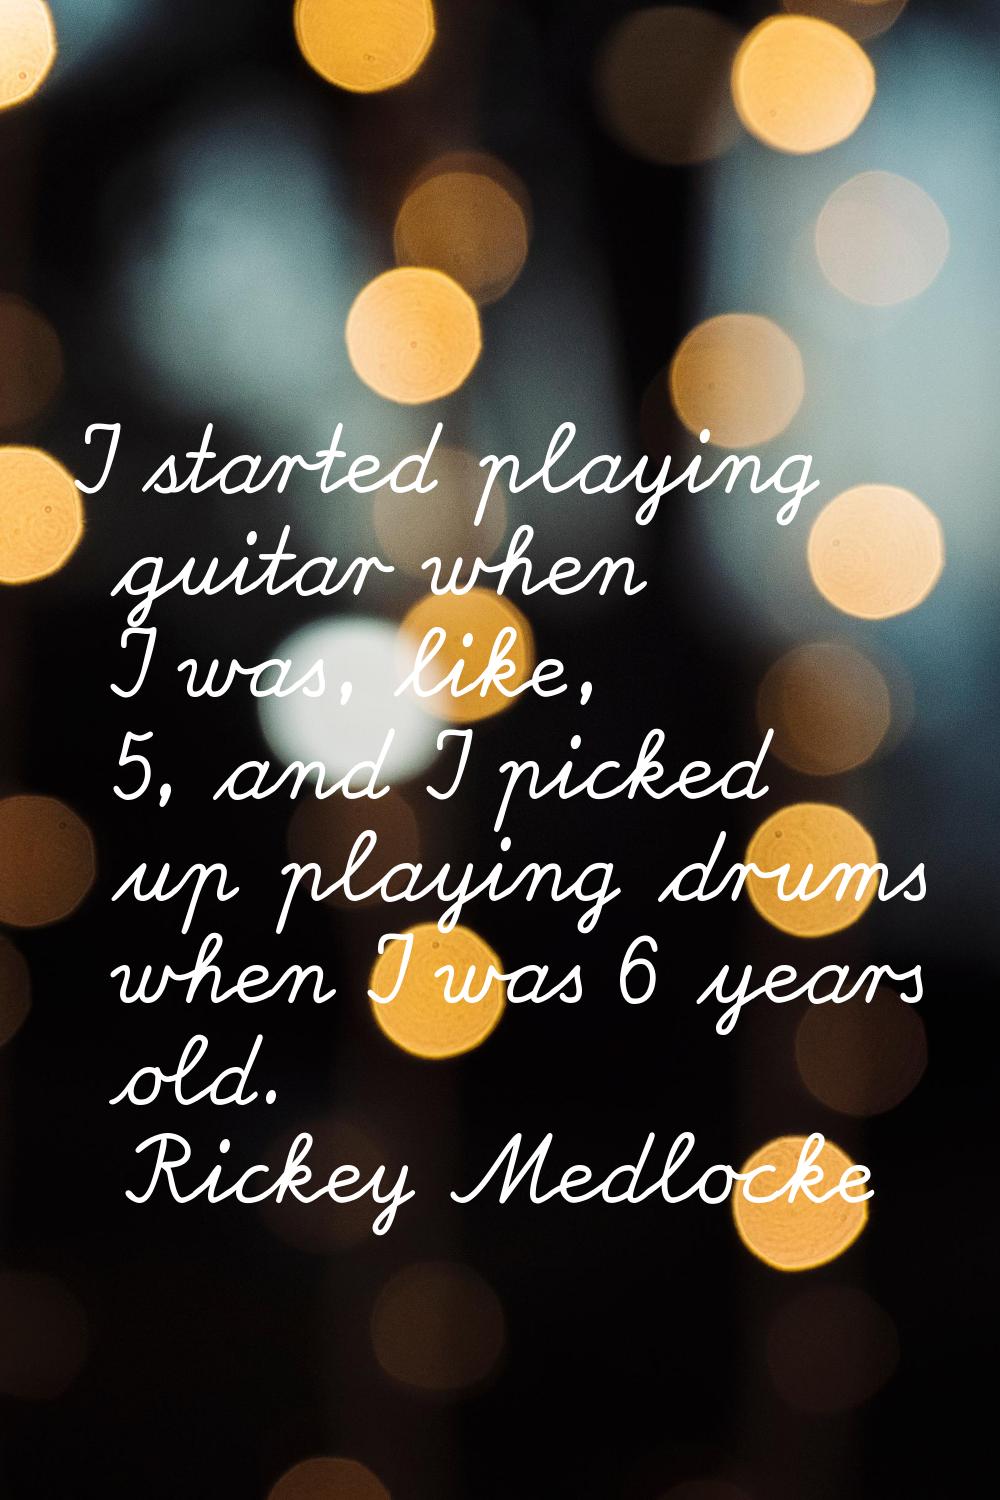 I started playing guitar when I was, like, 5, and I picked up playing drums when I was 6 years old.